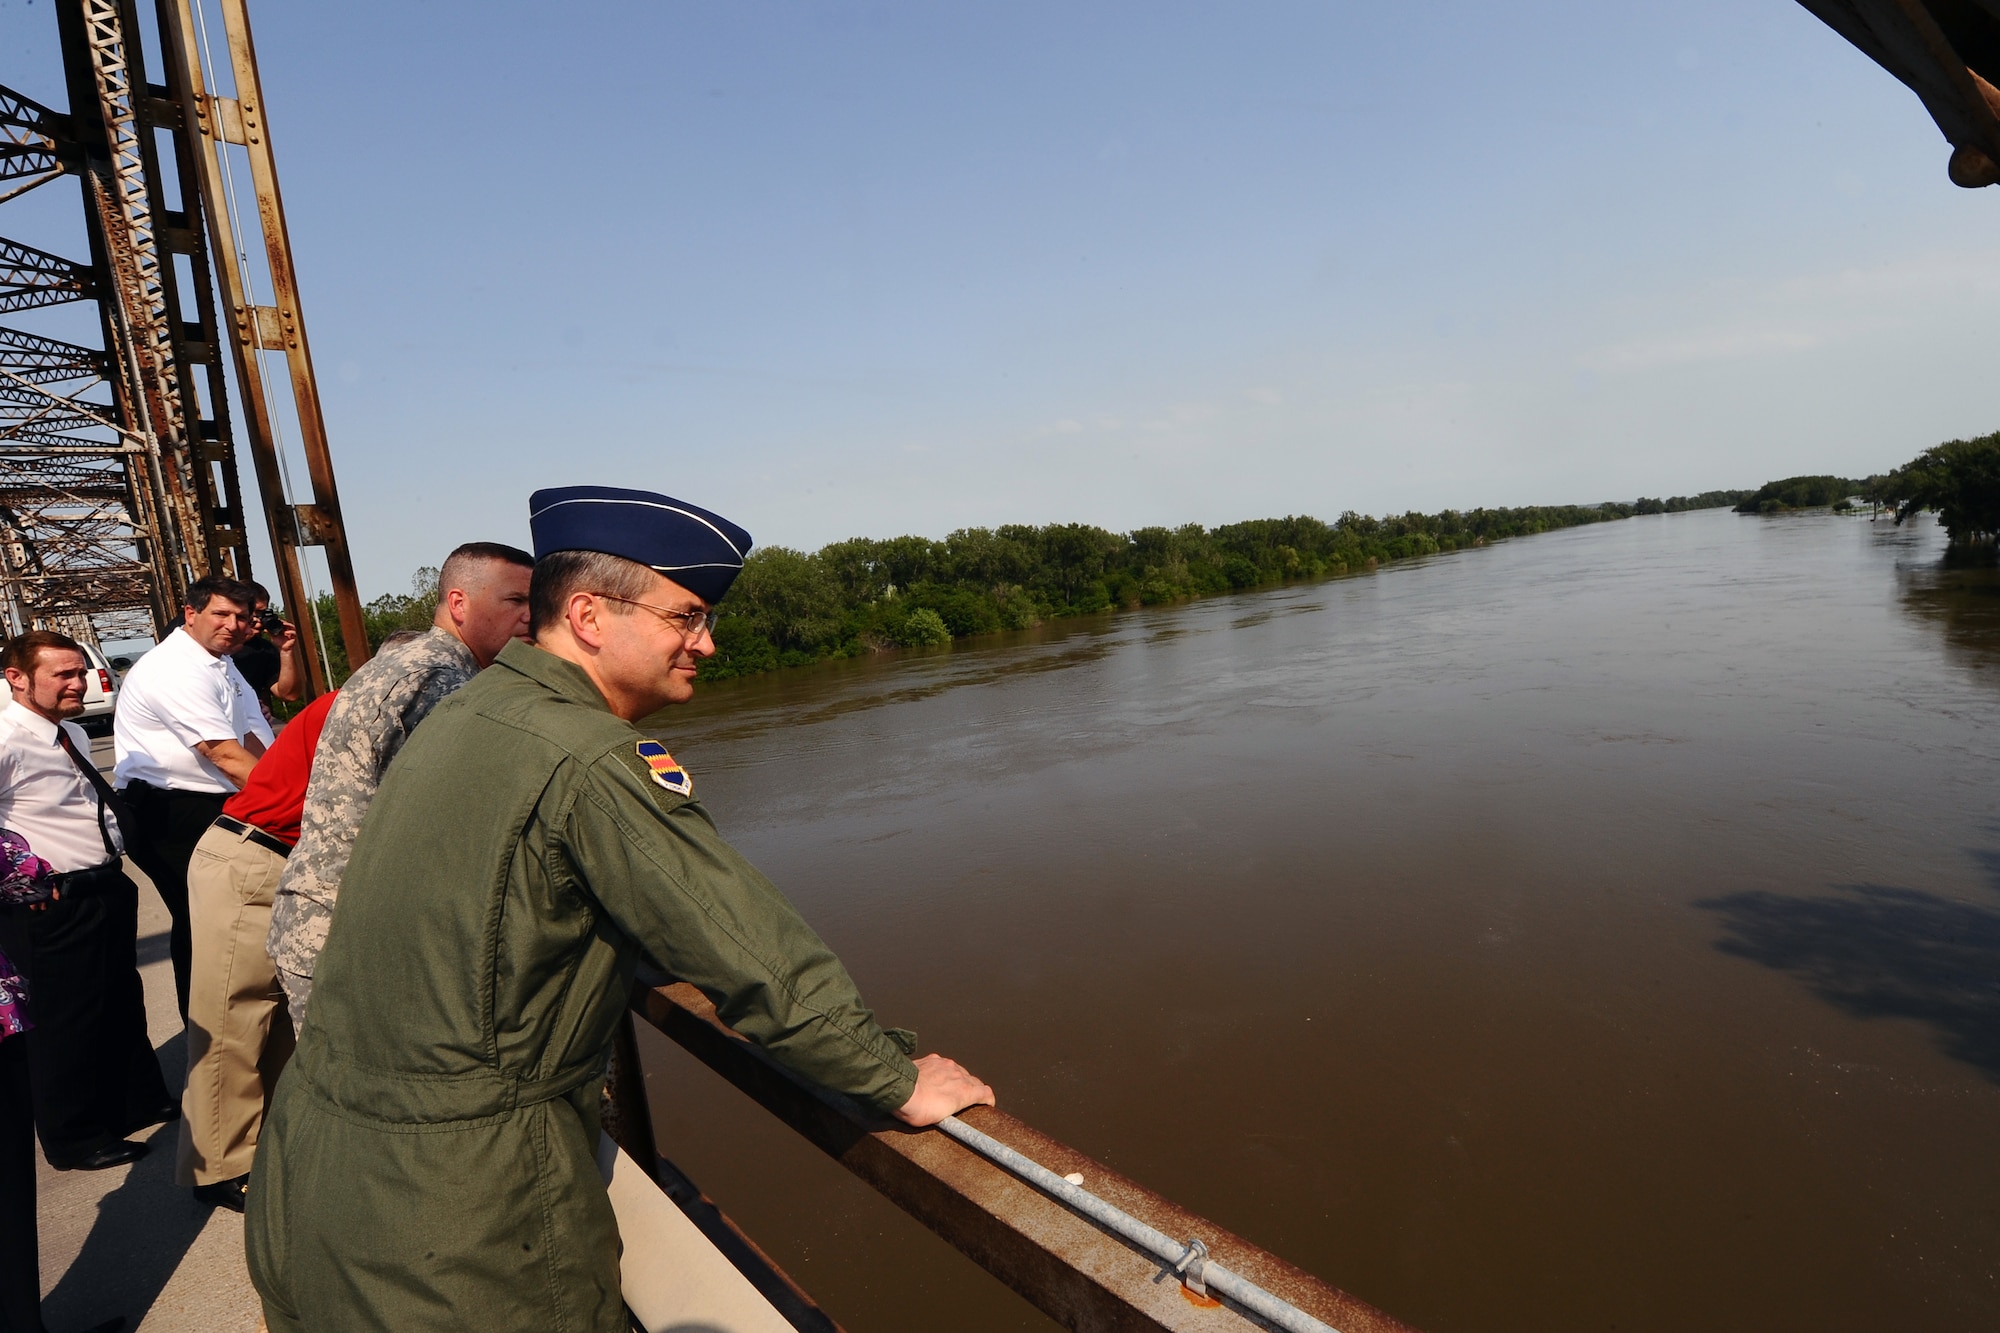 OFFUTT AIR FORCE BASE, Neb.- Brig. Gen. Donald Bacon, 55th Wing commander, stands on the Bellevue Bridge overlooking the Missouri River as it slowly inches toward Bellevue June 8.  Preparation for the increased water levels from the Missouri River is crucial in how Offutt adapts to its continuing mission despite the record water flow.  U.S. Air Force Photo by Josh Plueger.